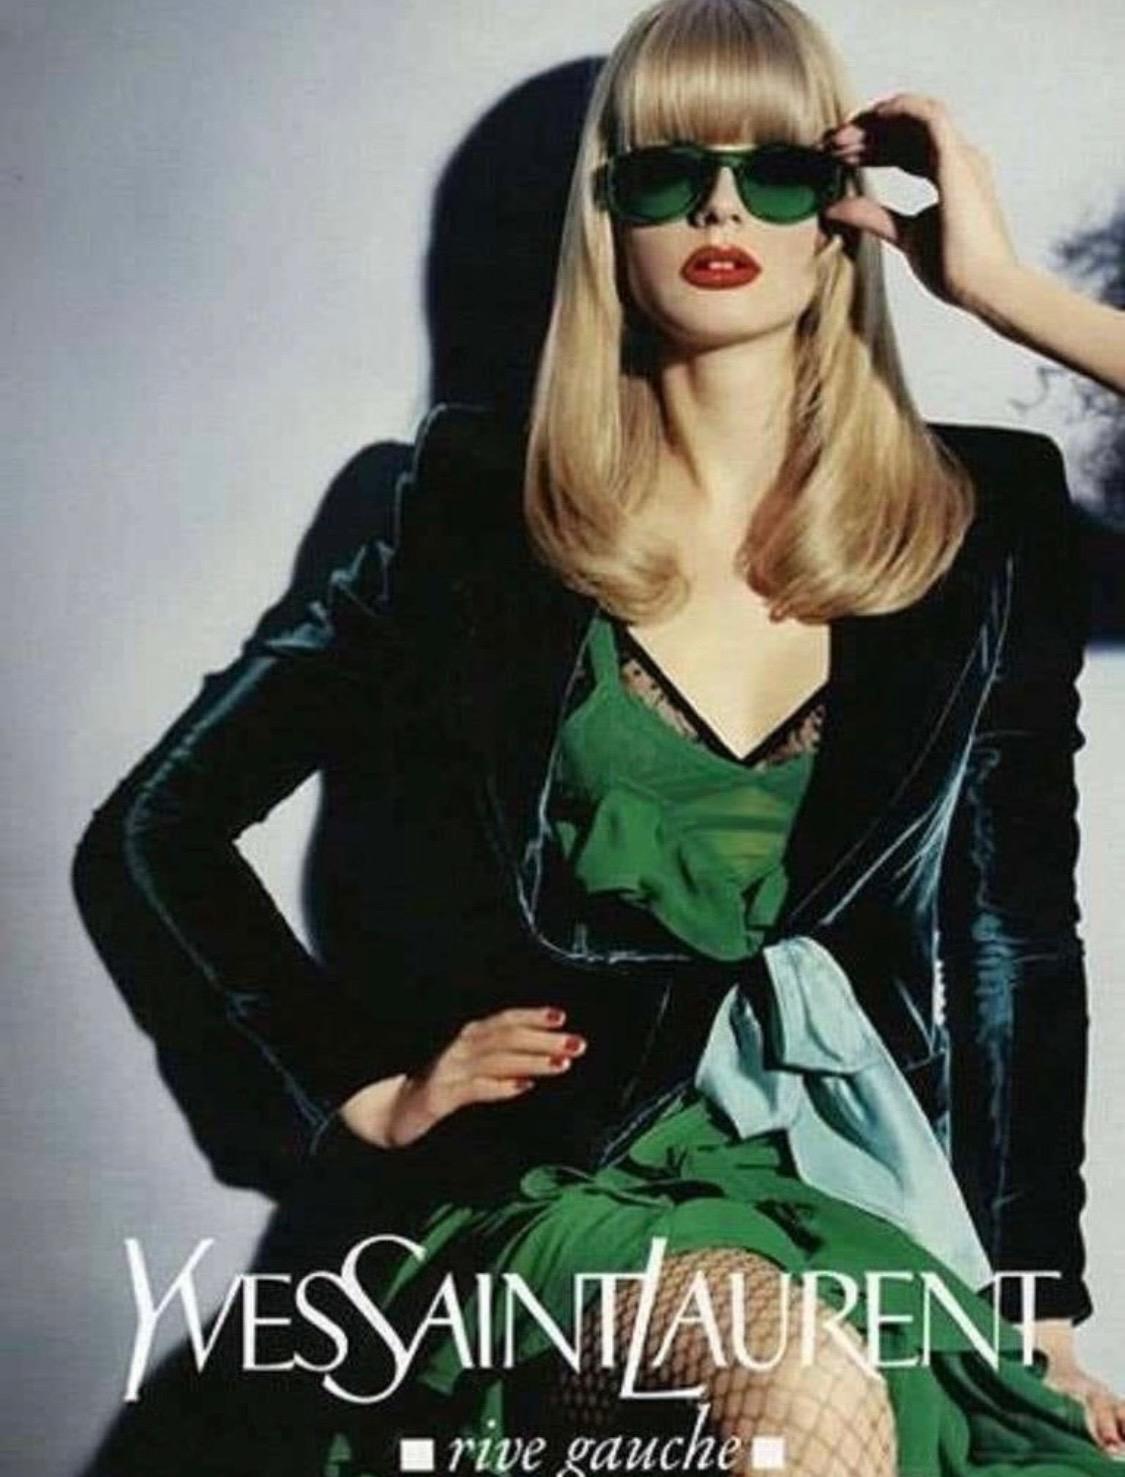 Presenting an iconic emerald green Yves Saint Laurent Rive Gauche silk tank top, designed by Tom Ford. From the Fall/Winter 2003 collection, a dress version of this top debuted on the season's runway as look 1 modeled by Julia Stegner and in the